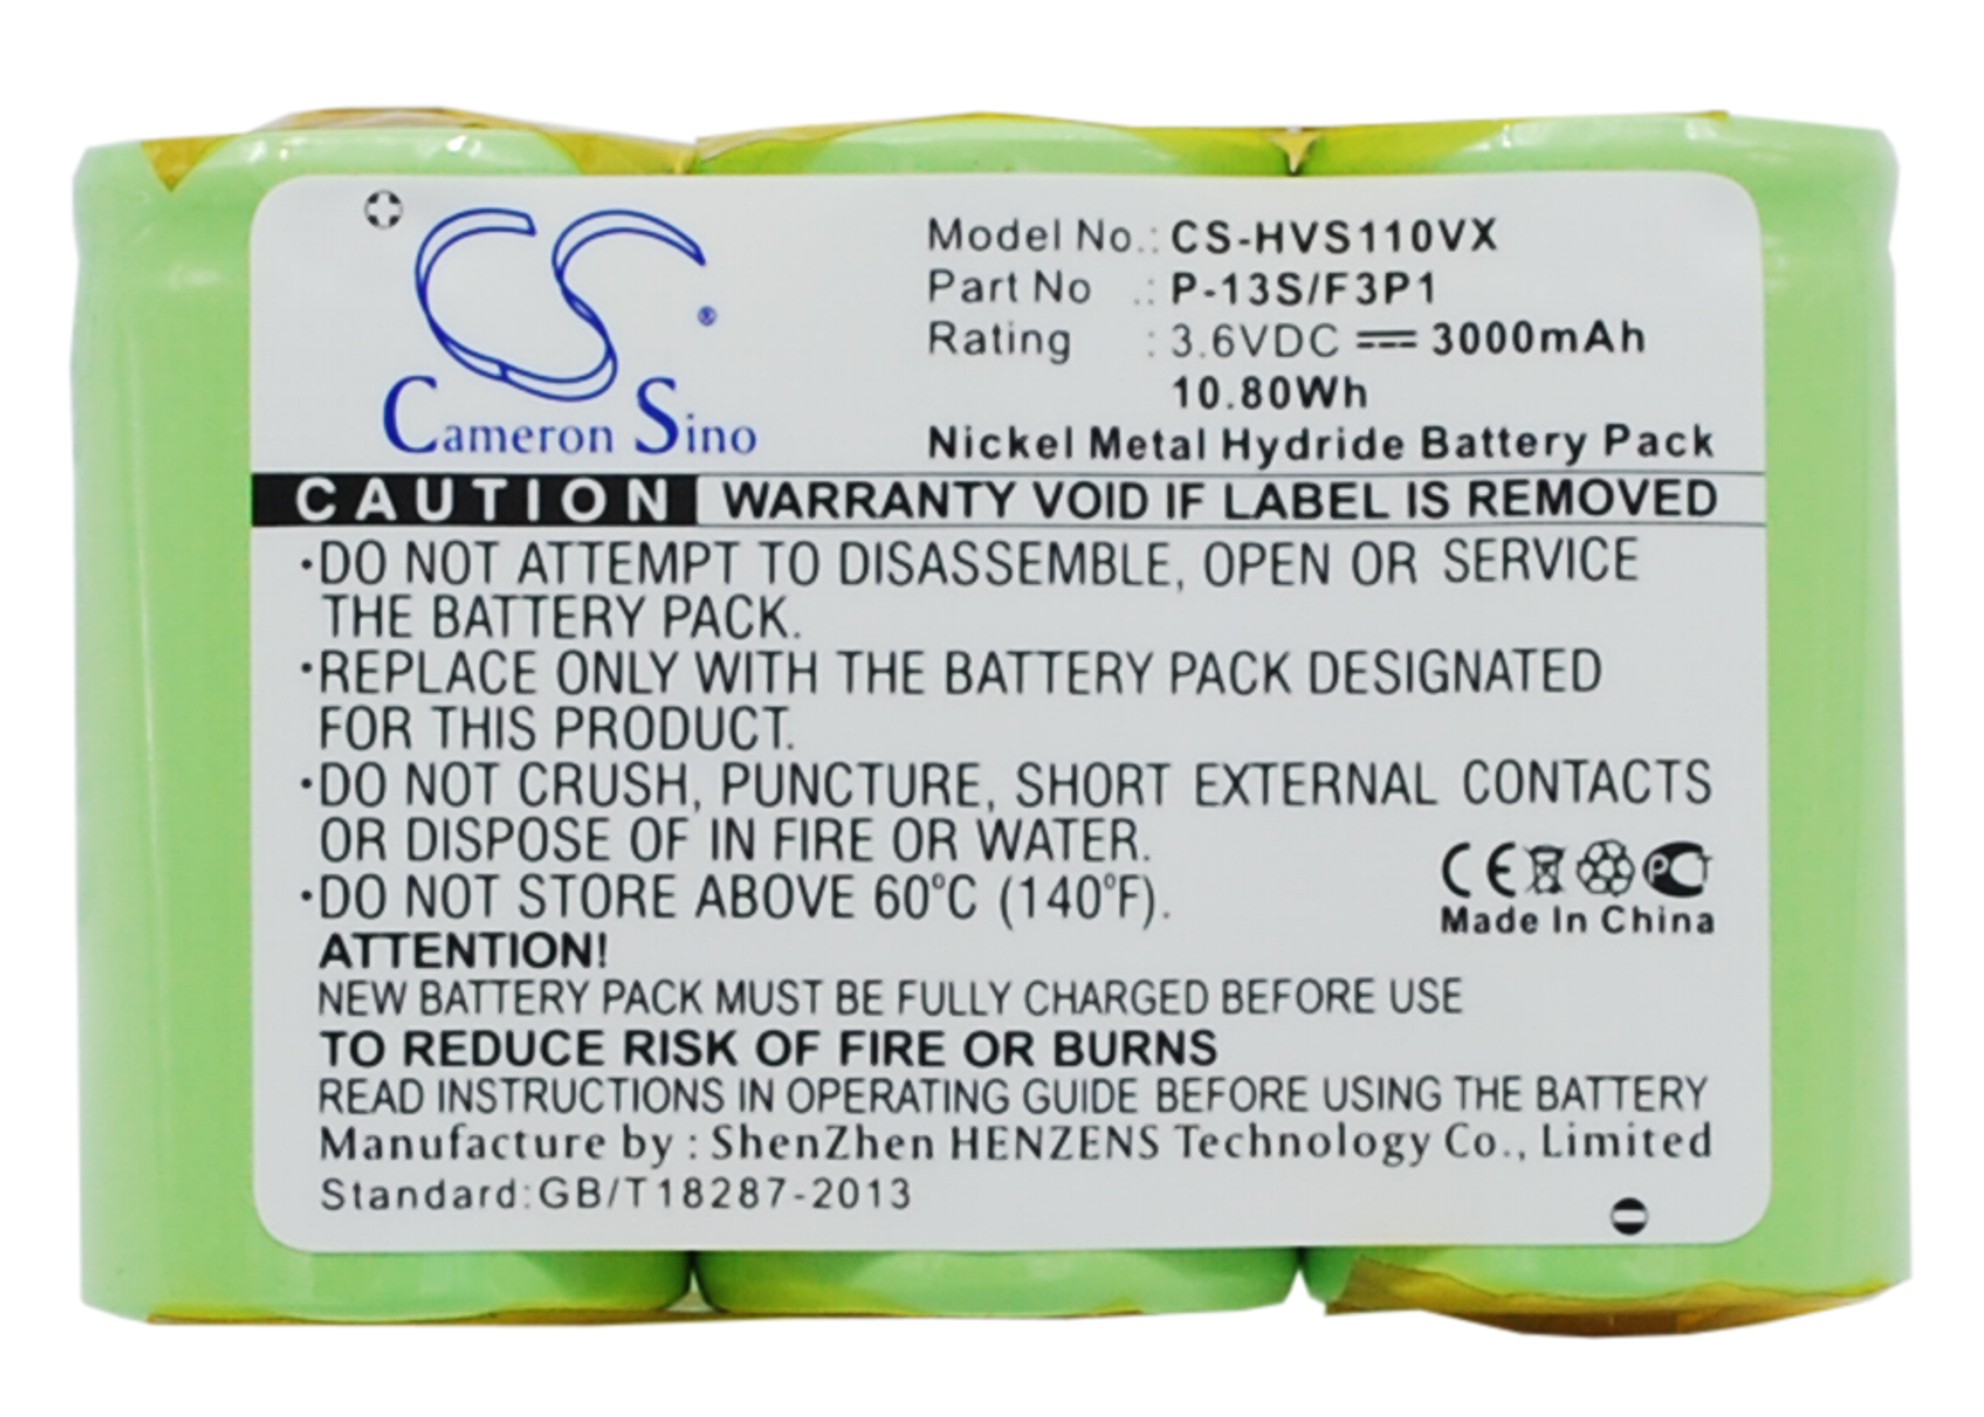 Cameron Sino Battery for Hoover P-13S/F3P1 300 H-59139115 HANDVAC S1103 S1105 S1117-900 -981